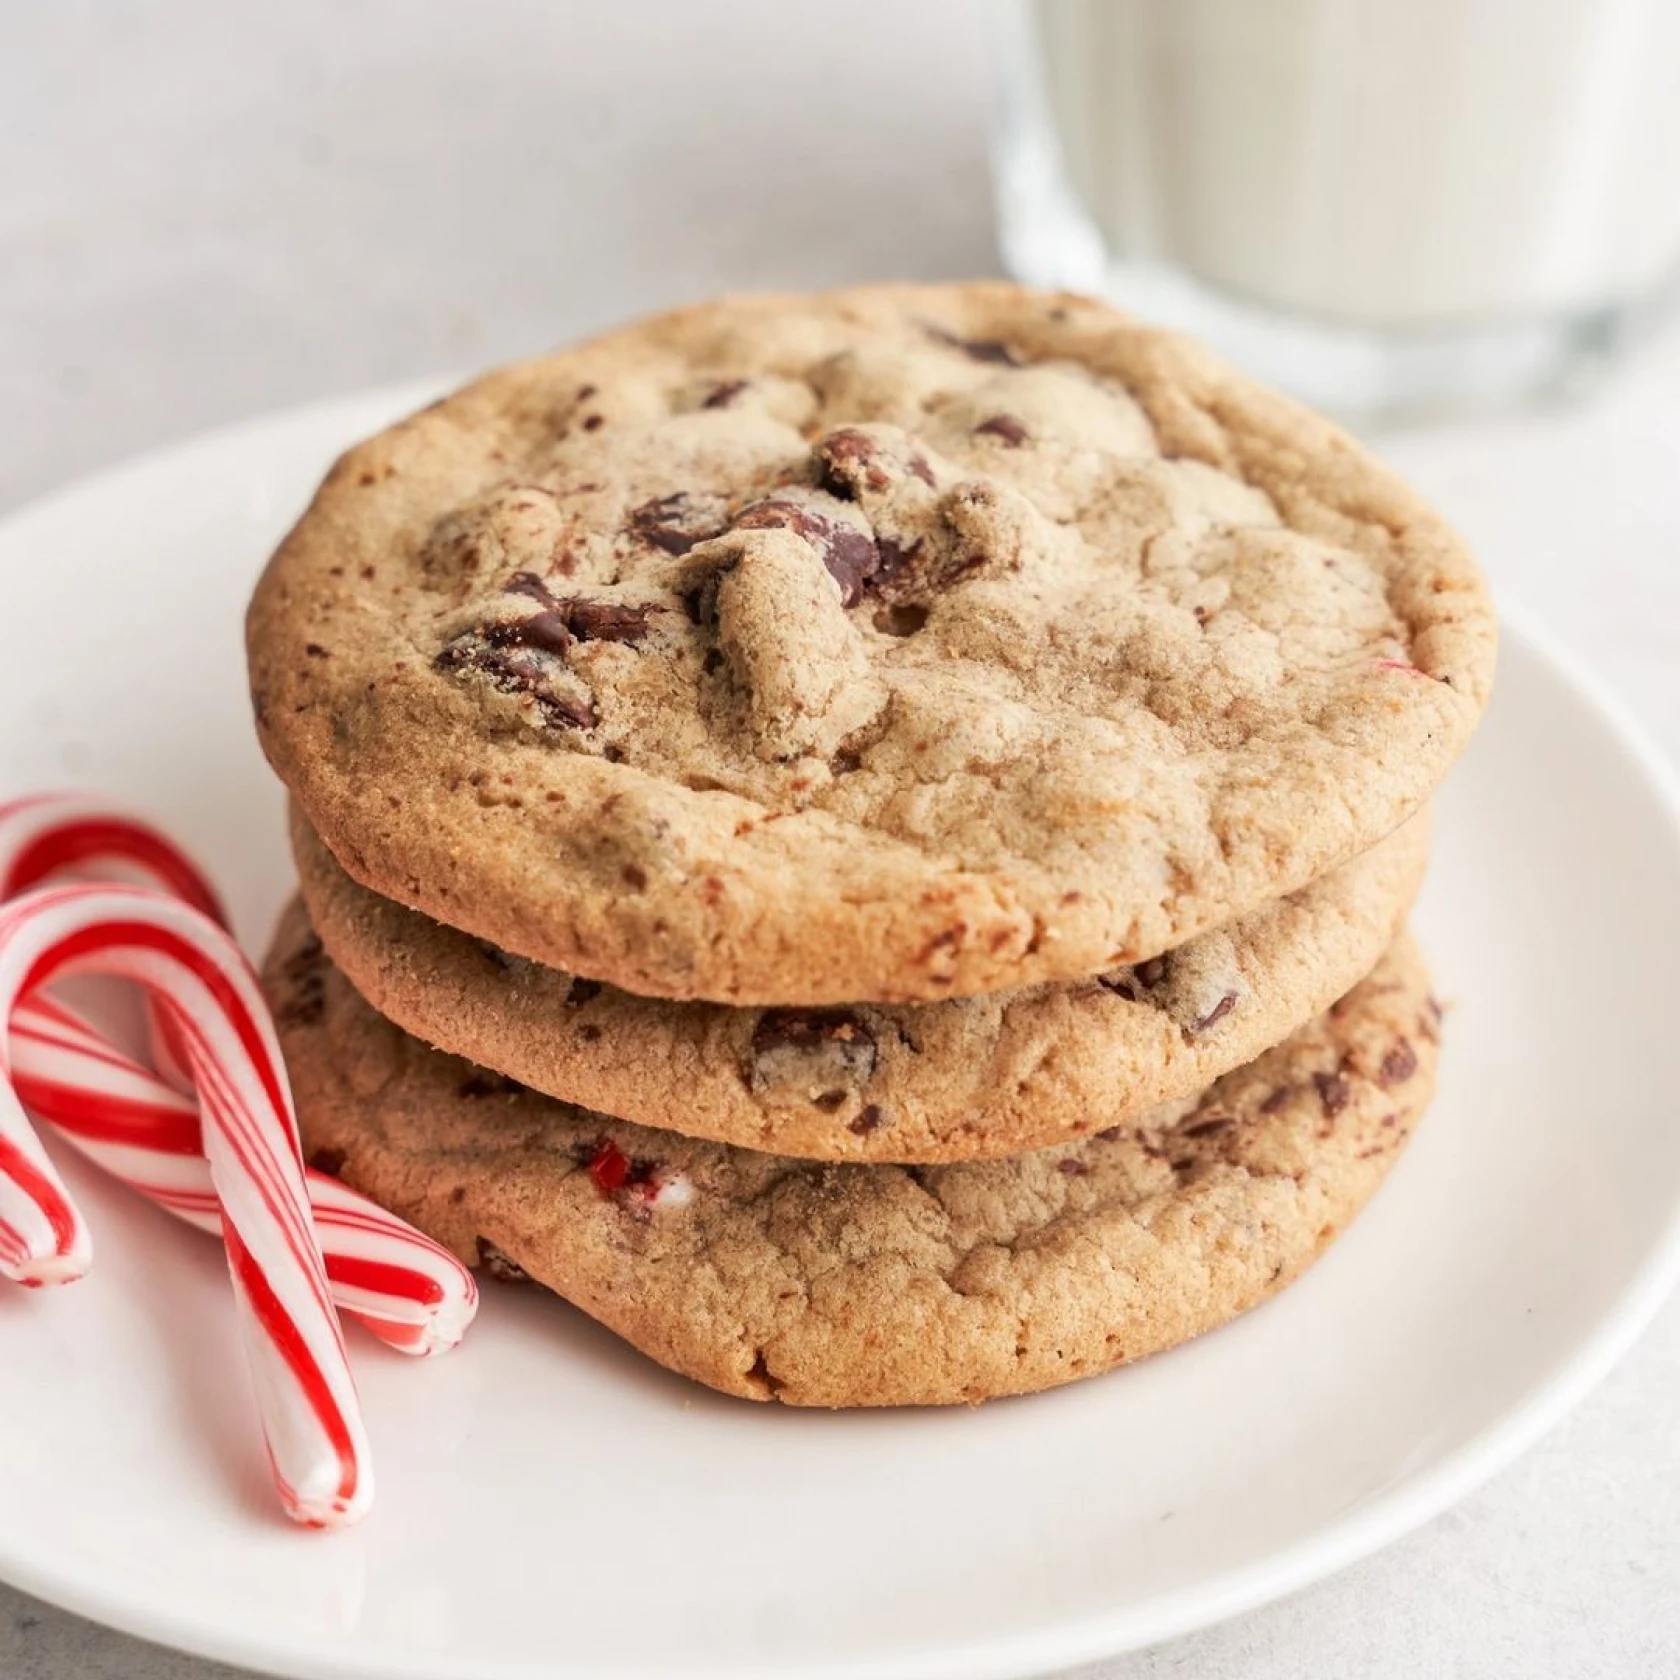 stack of three chocolate chip cookies with two peppermint sticks next to glass of milk